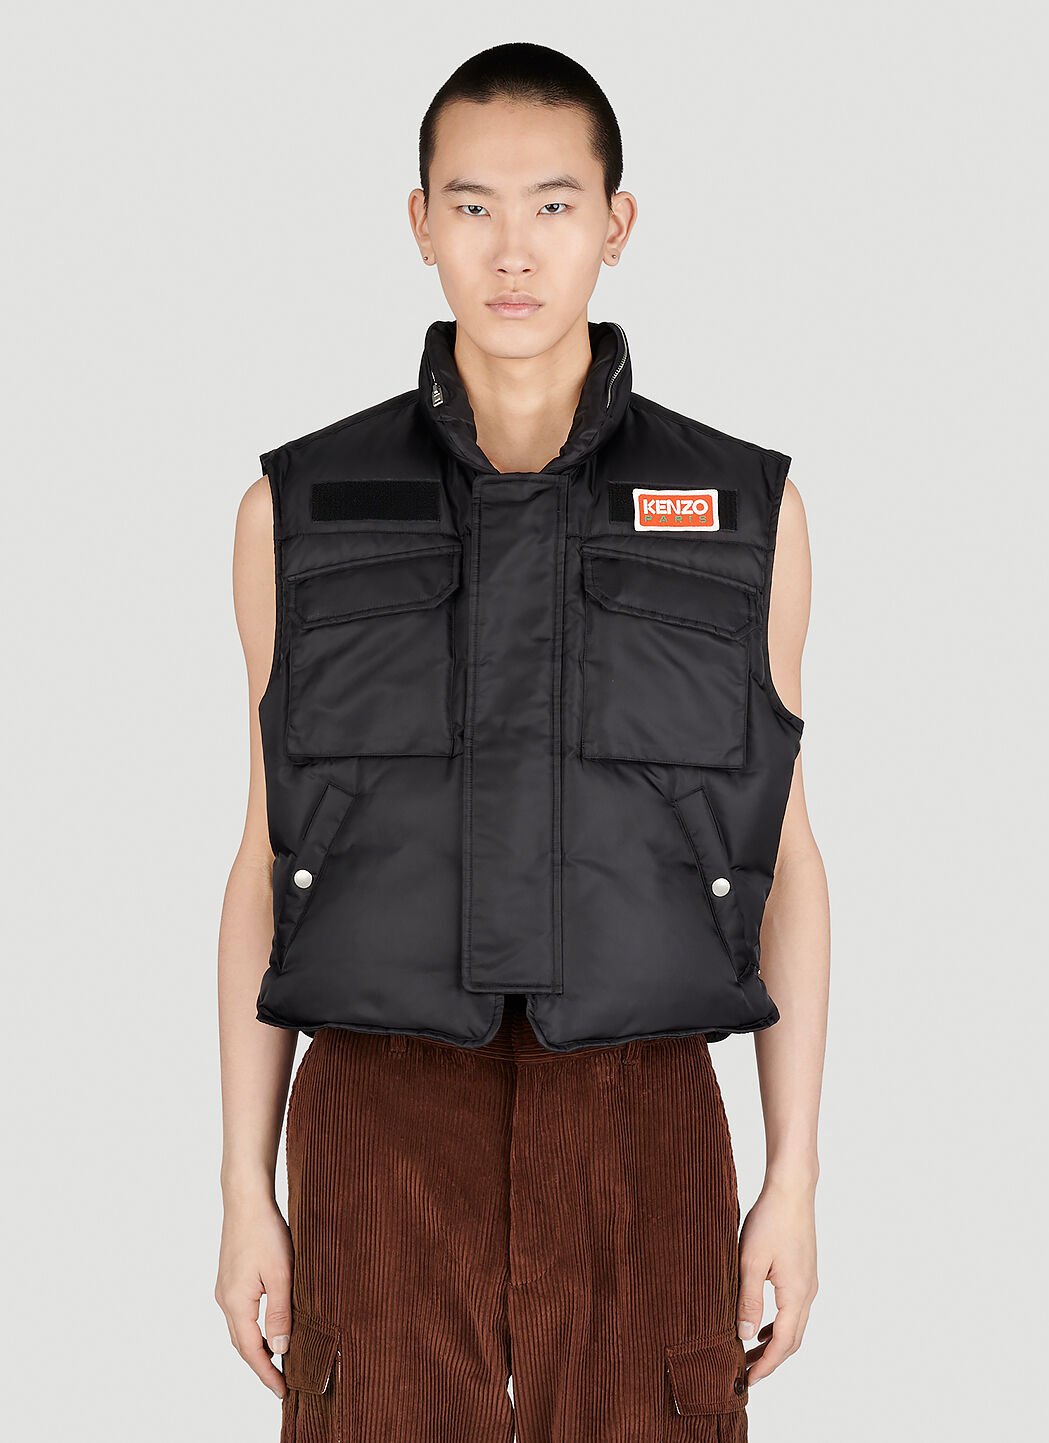 Kenzo x Levi's Quilted Cargo Vest Blue klv0156002